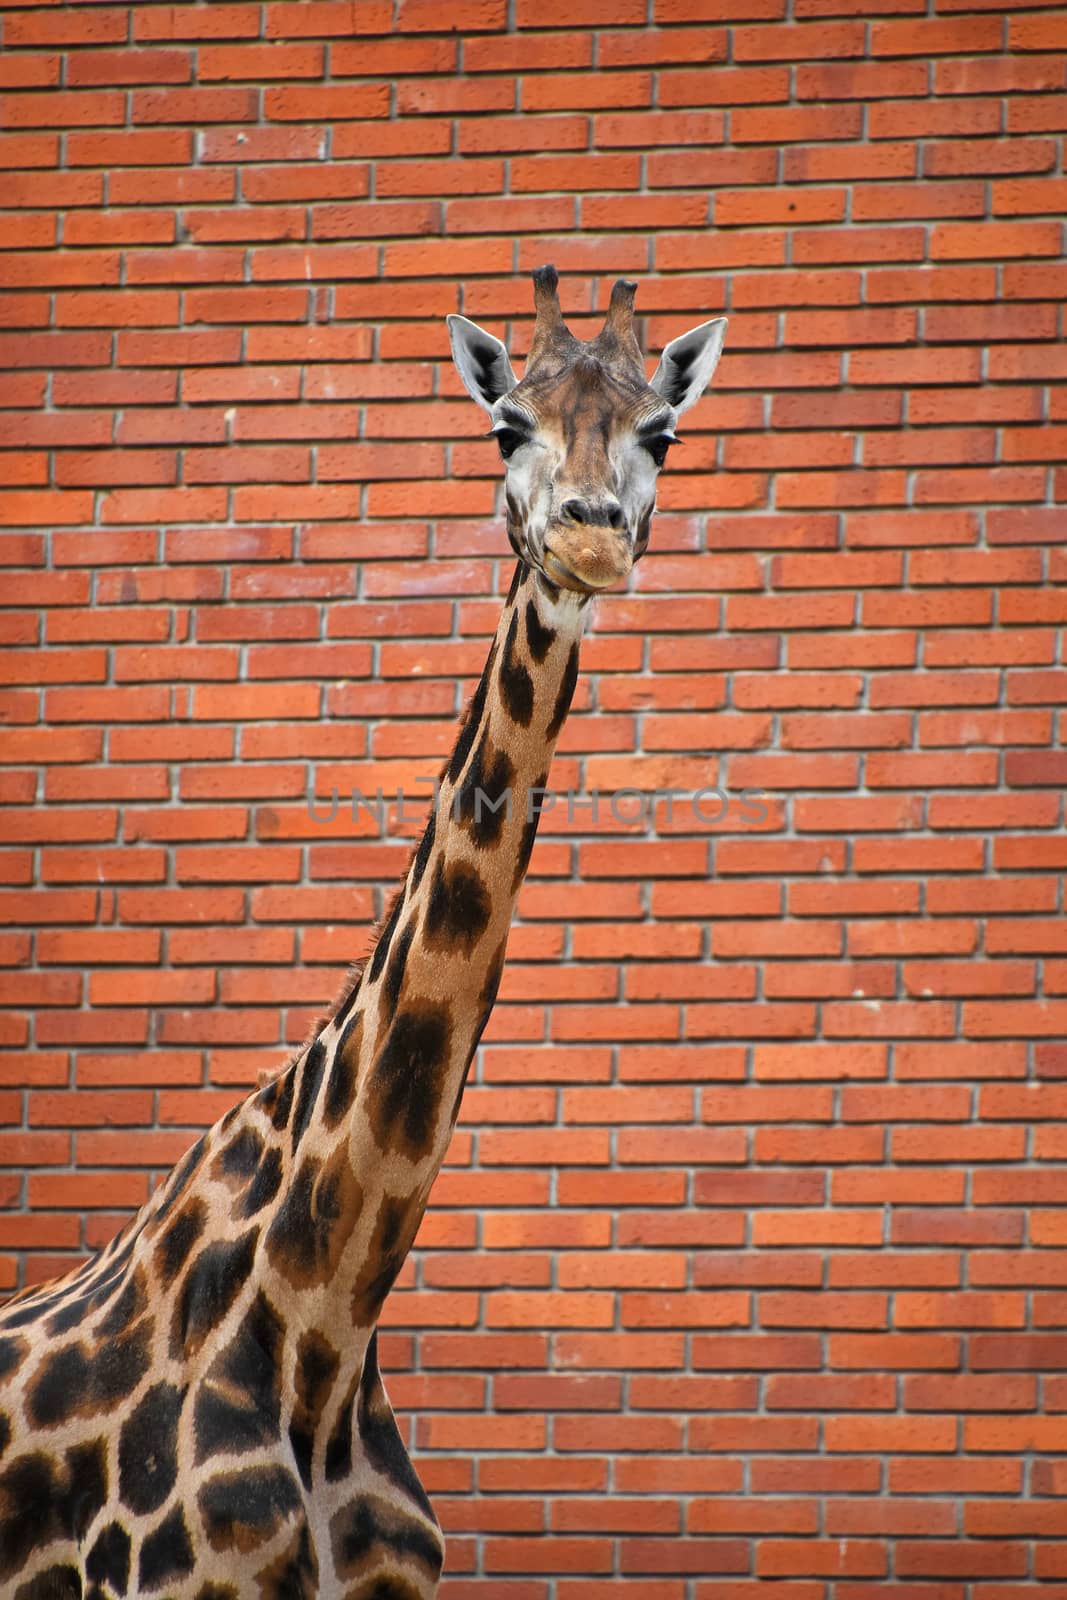 Close up front portrait of one giraffe looking at camera over background of red brick wall, low angle viewClose up front portrait of one giraffe looking at camera over background of red brick wall, low angle view